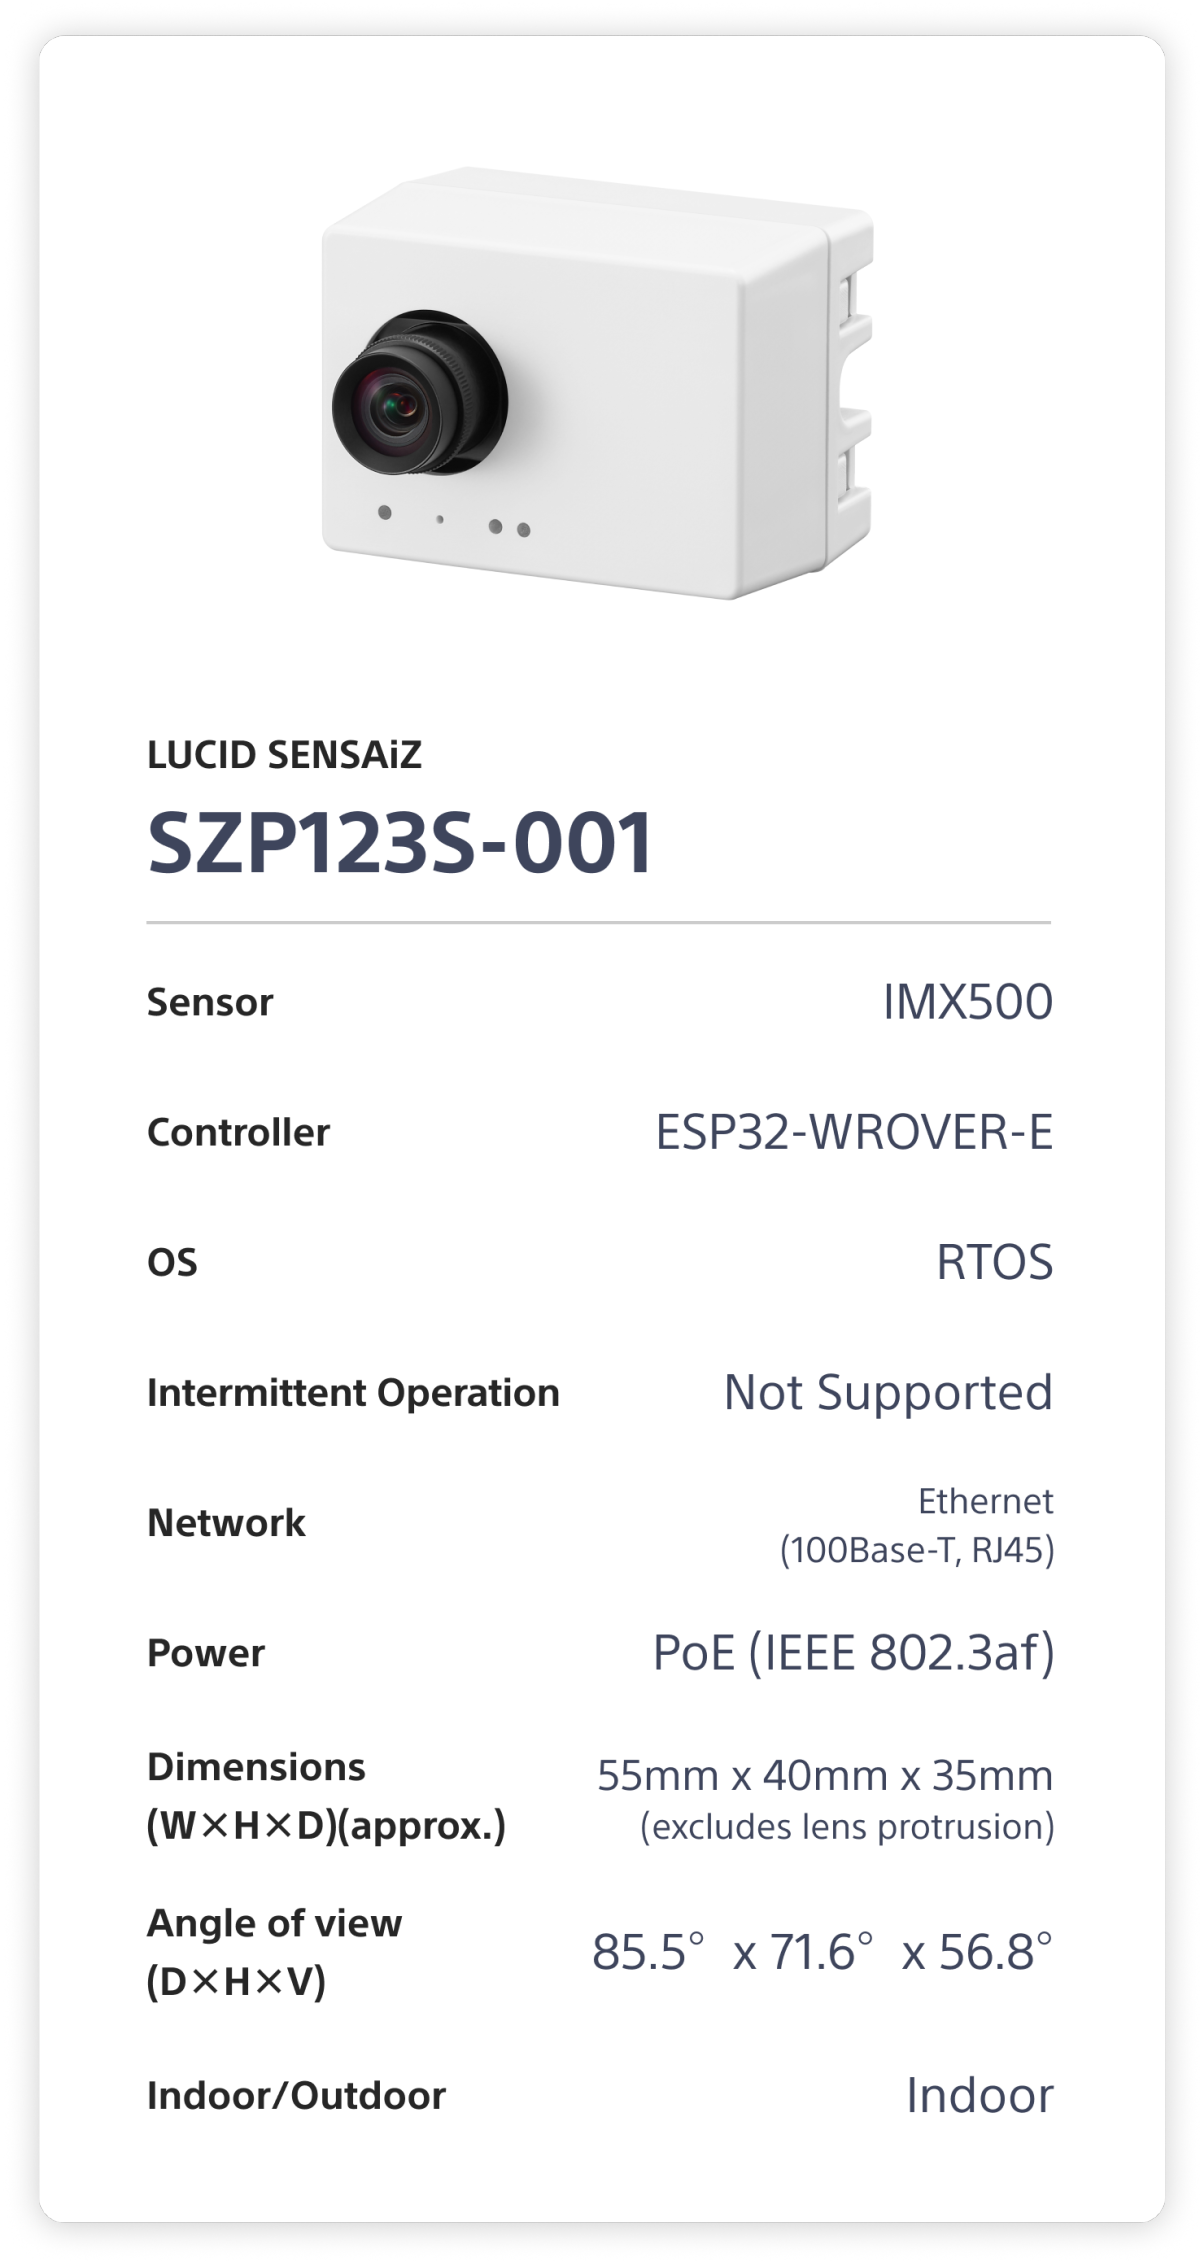 LUCID SENSAiZ  SZP123S-001. Sensor: IMX500. Controller: ESP32-WROVER-E. OS: RTOS. Intermittent Operation: Not Supported. Network: Ethernet (100Base-T, RJ45). Power: PoE (1EEE 802.3af). Dimensions (W×H×D)(approx.): 55mm x 40mm x 35mm (excludes lens protrusion). Angle of view (D×H×V): 85.5°x 71.6°x 56.8°. Indoor/Outdoor: Indoor.